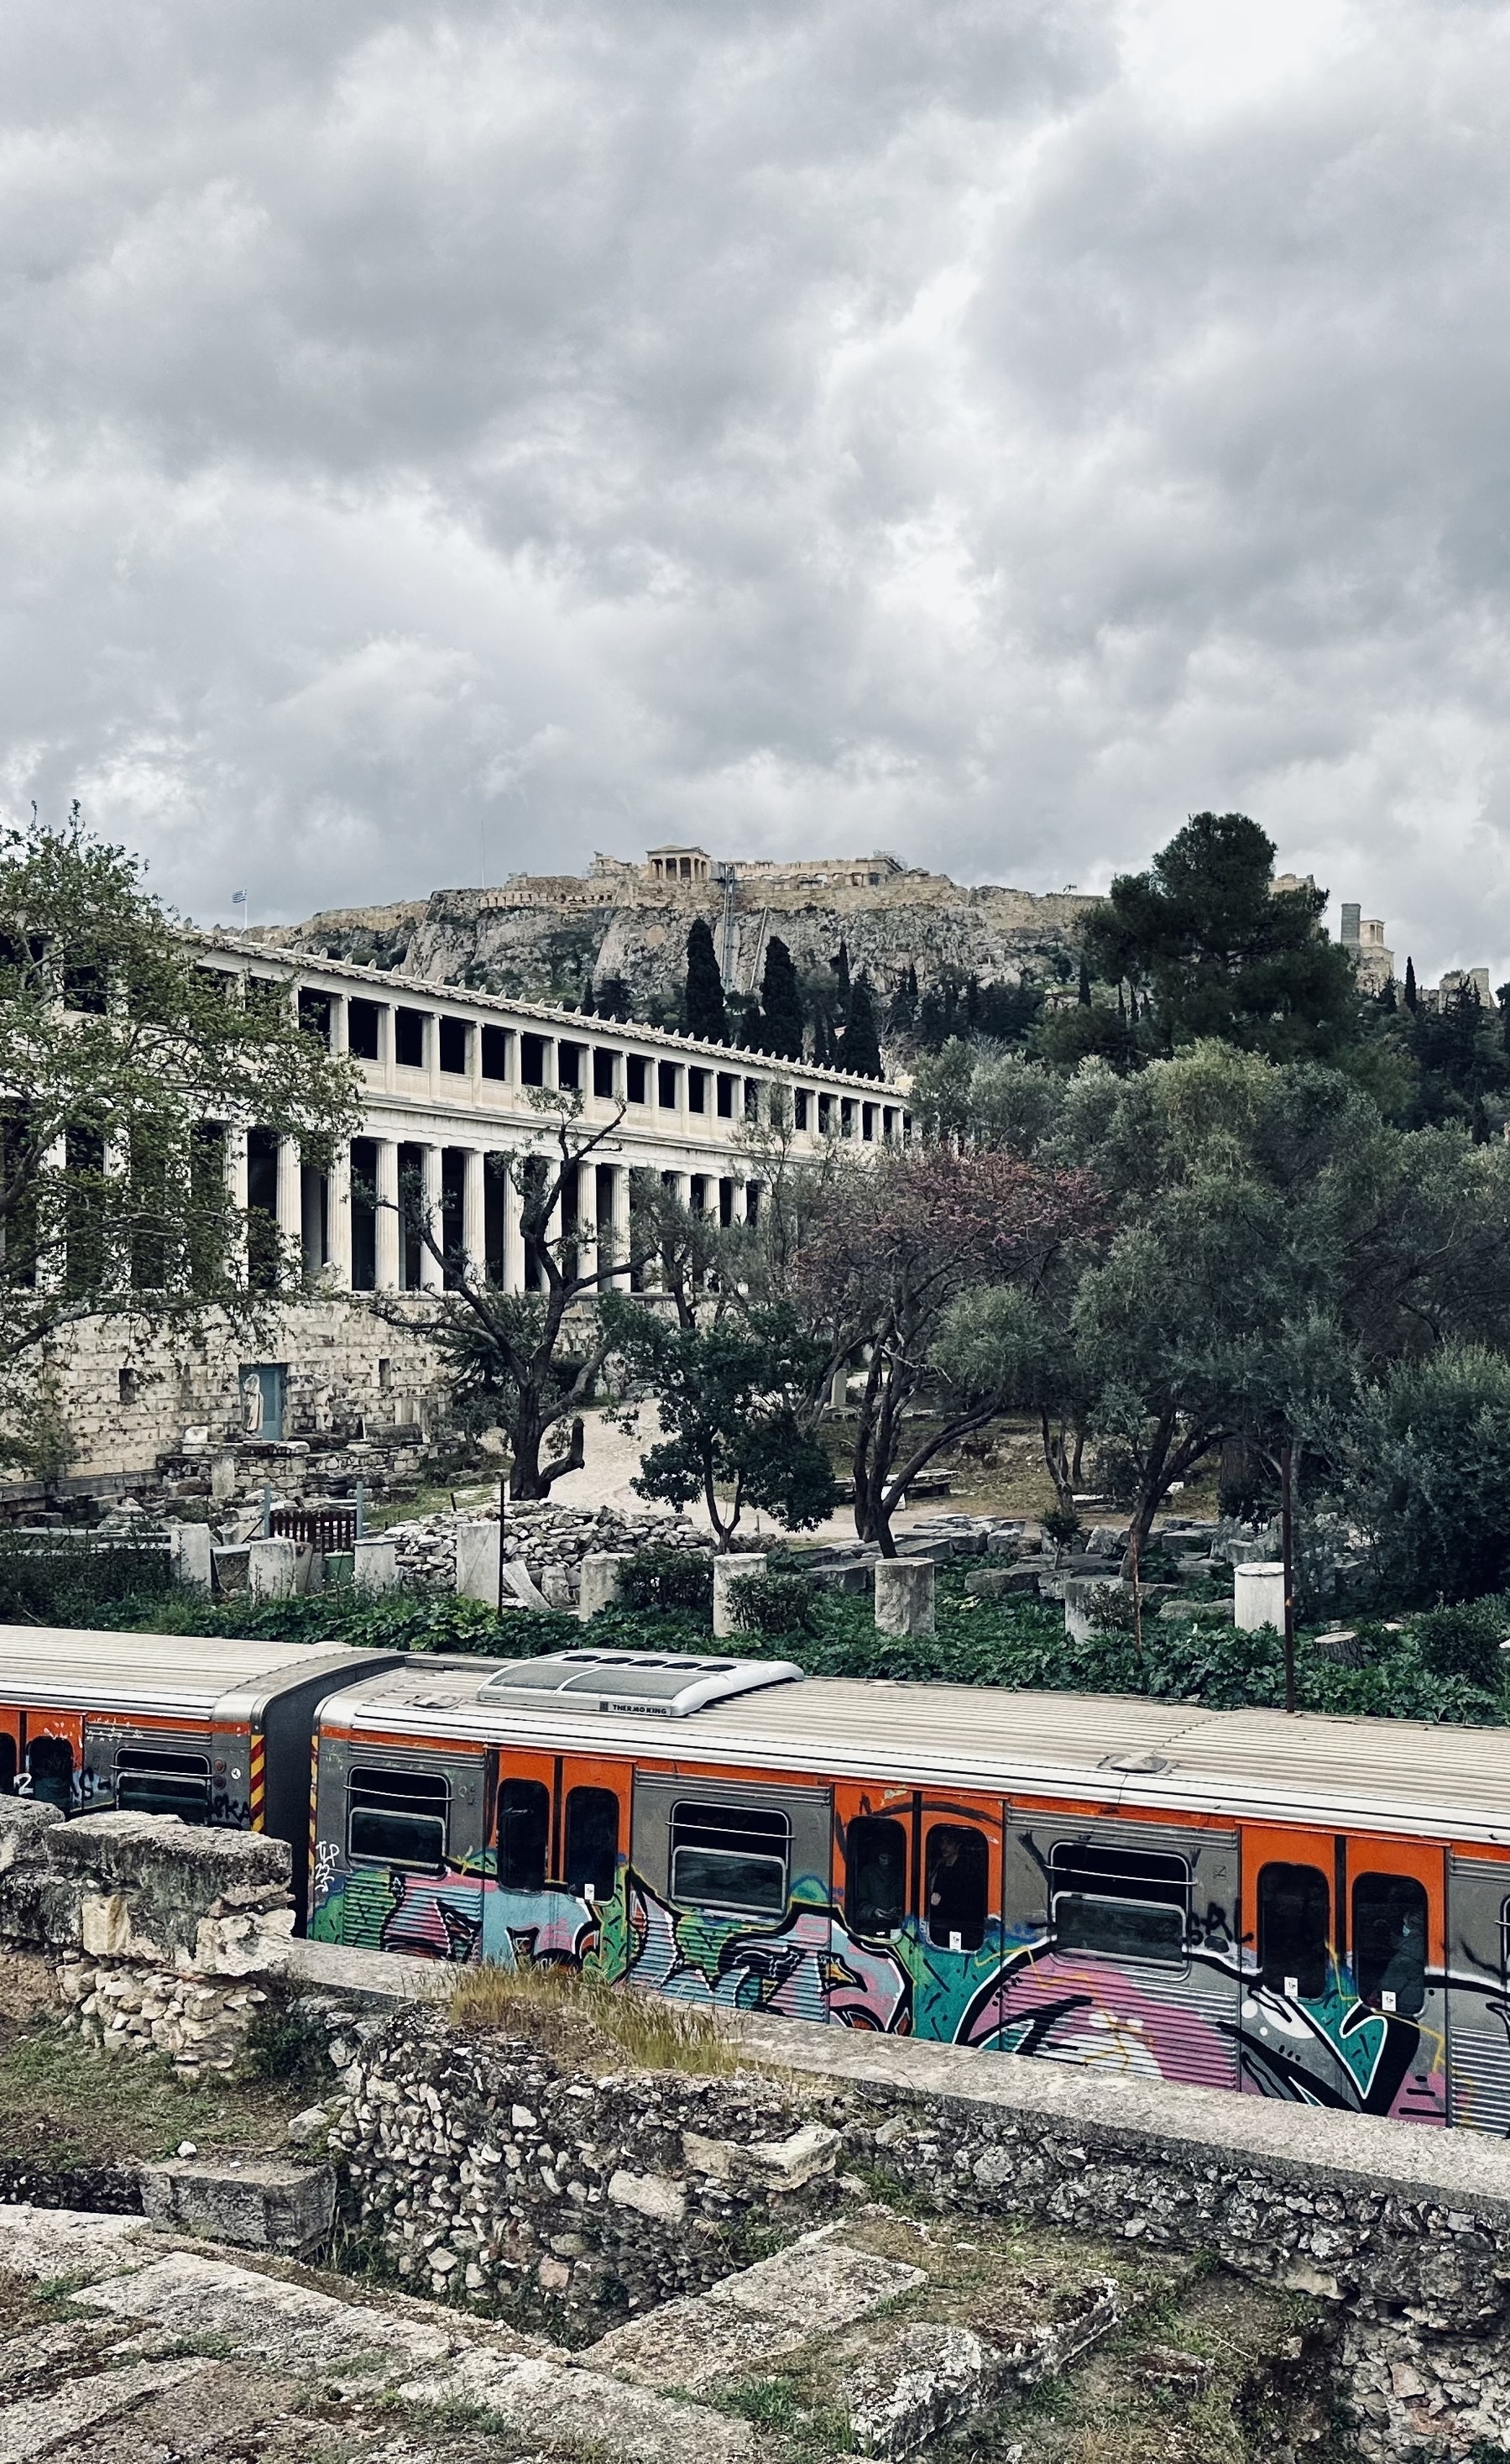 A metro train passing in front of the Stoa of Attalos in the Agora of Athens. In the distance is the Acropolis, with grey clouds above.